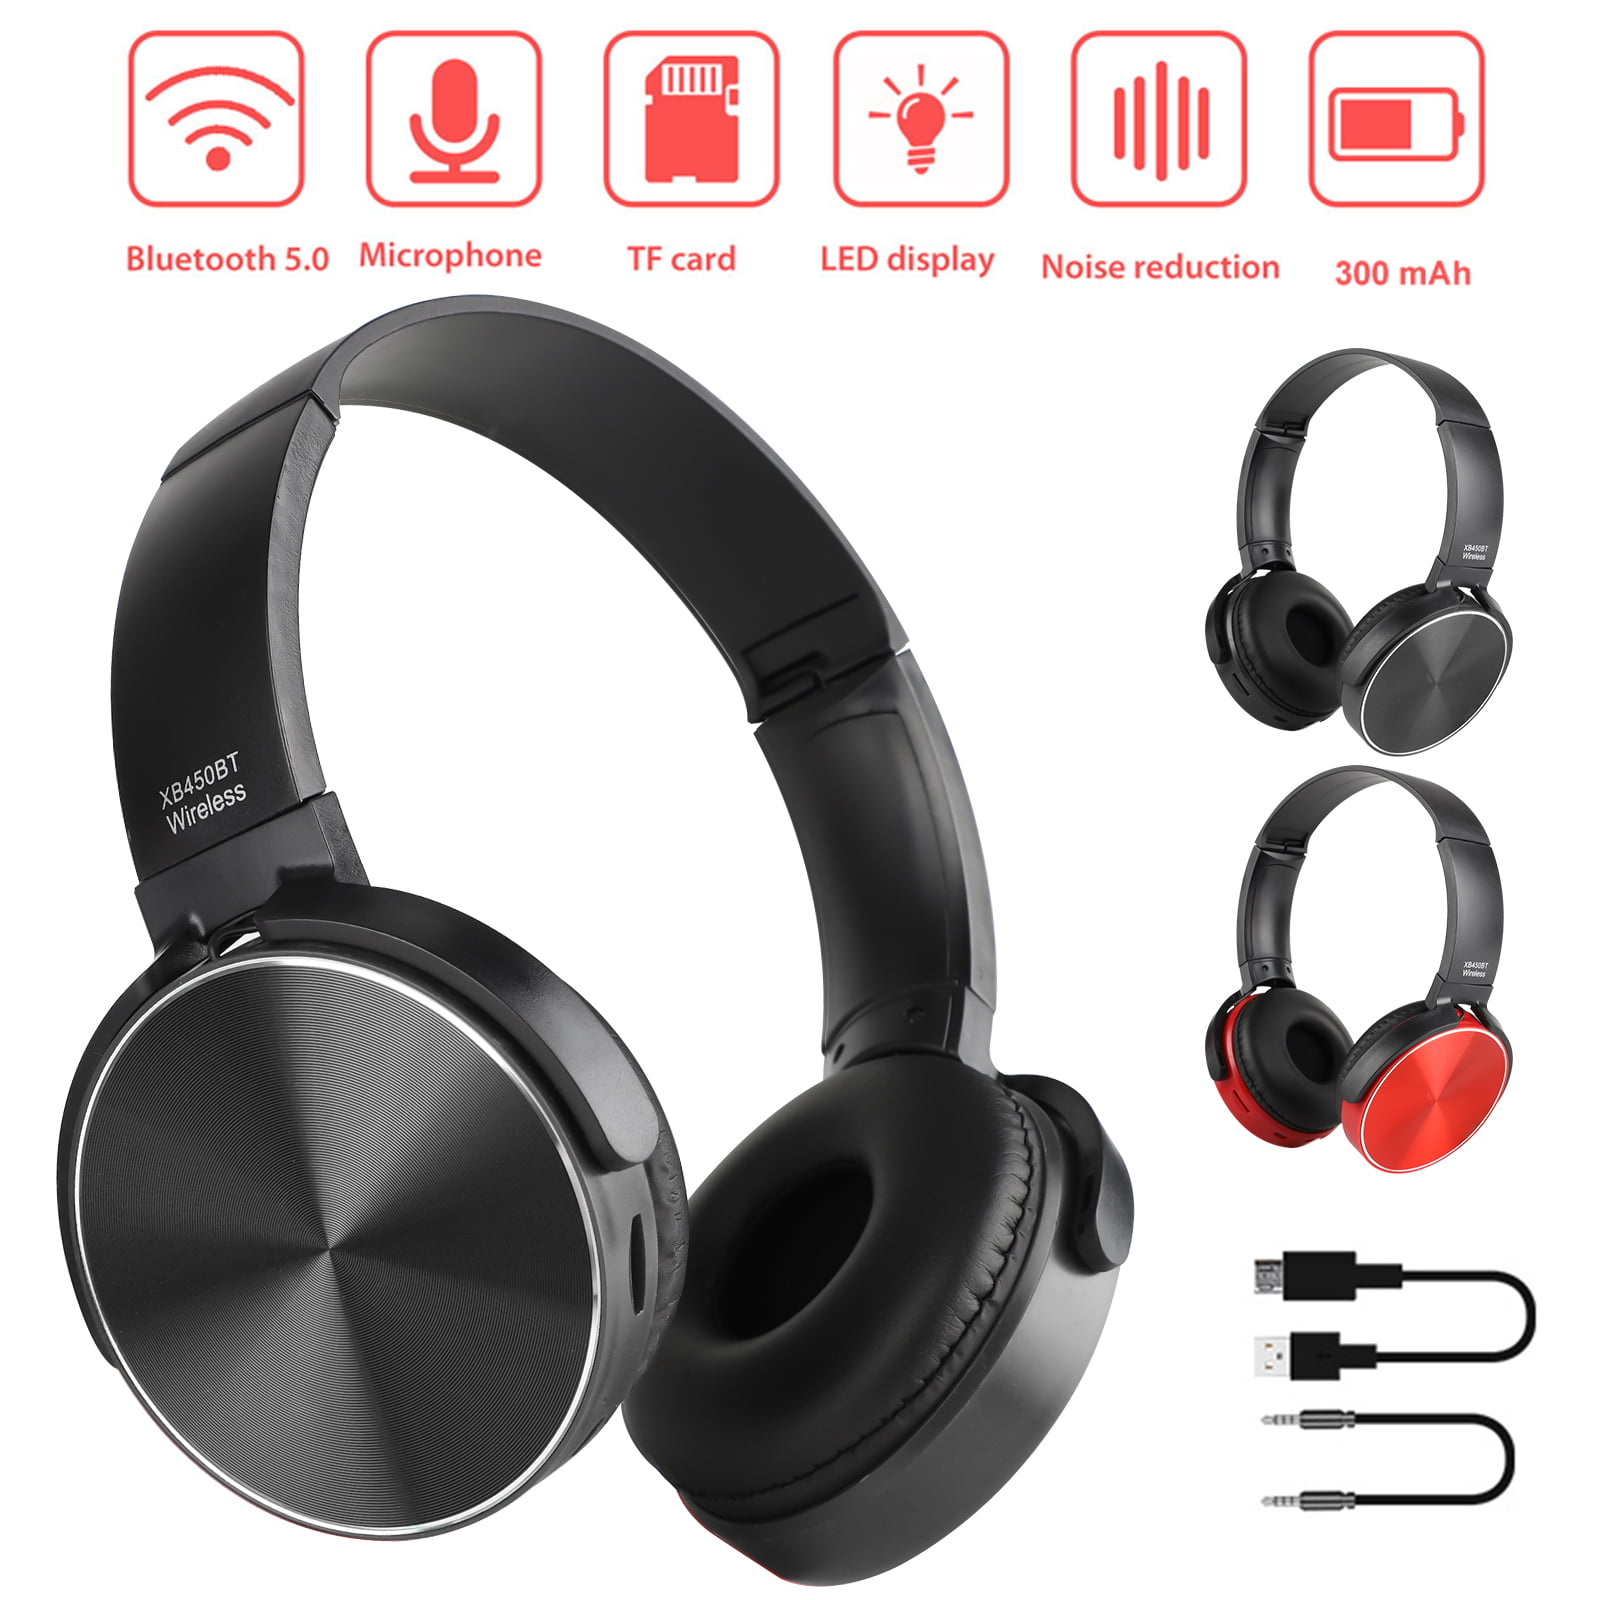 Bluetooth Headphones Tsv Stereo Wireless Bluetooth Headphones Over Ear With Noise Cancelling Mic Wired Stereo Gaming Headset Fit For Nintendo Switch Ps4 Xbox One Pc Android And Ios Black Red Walmart Com